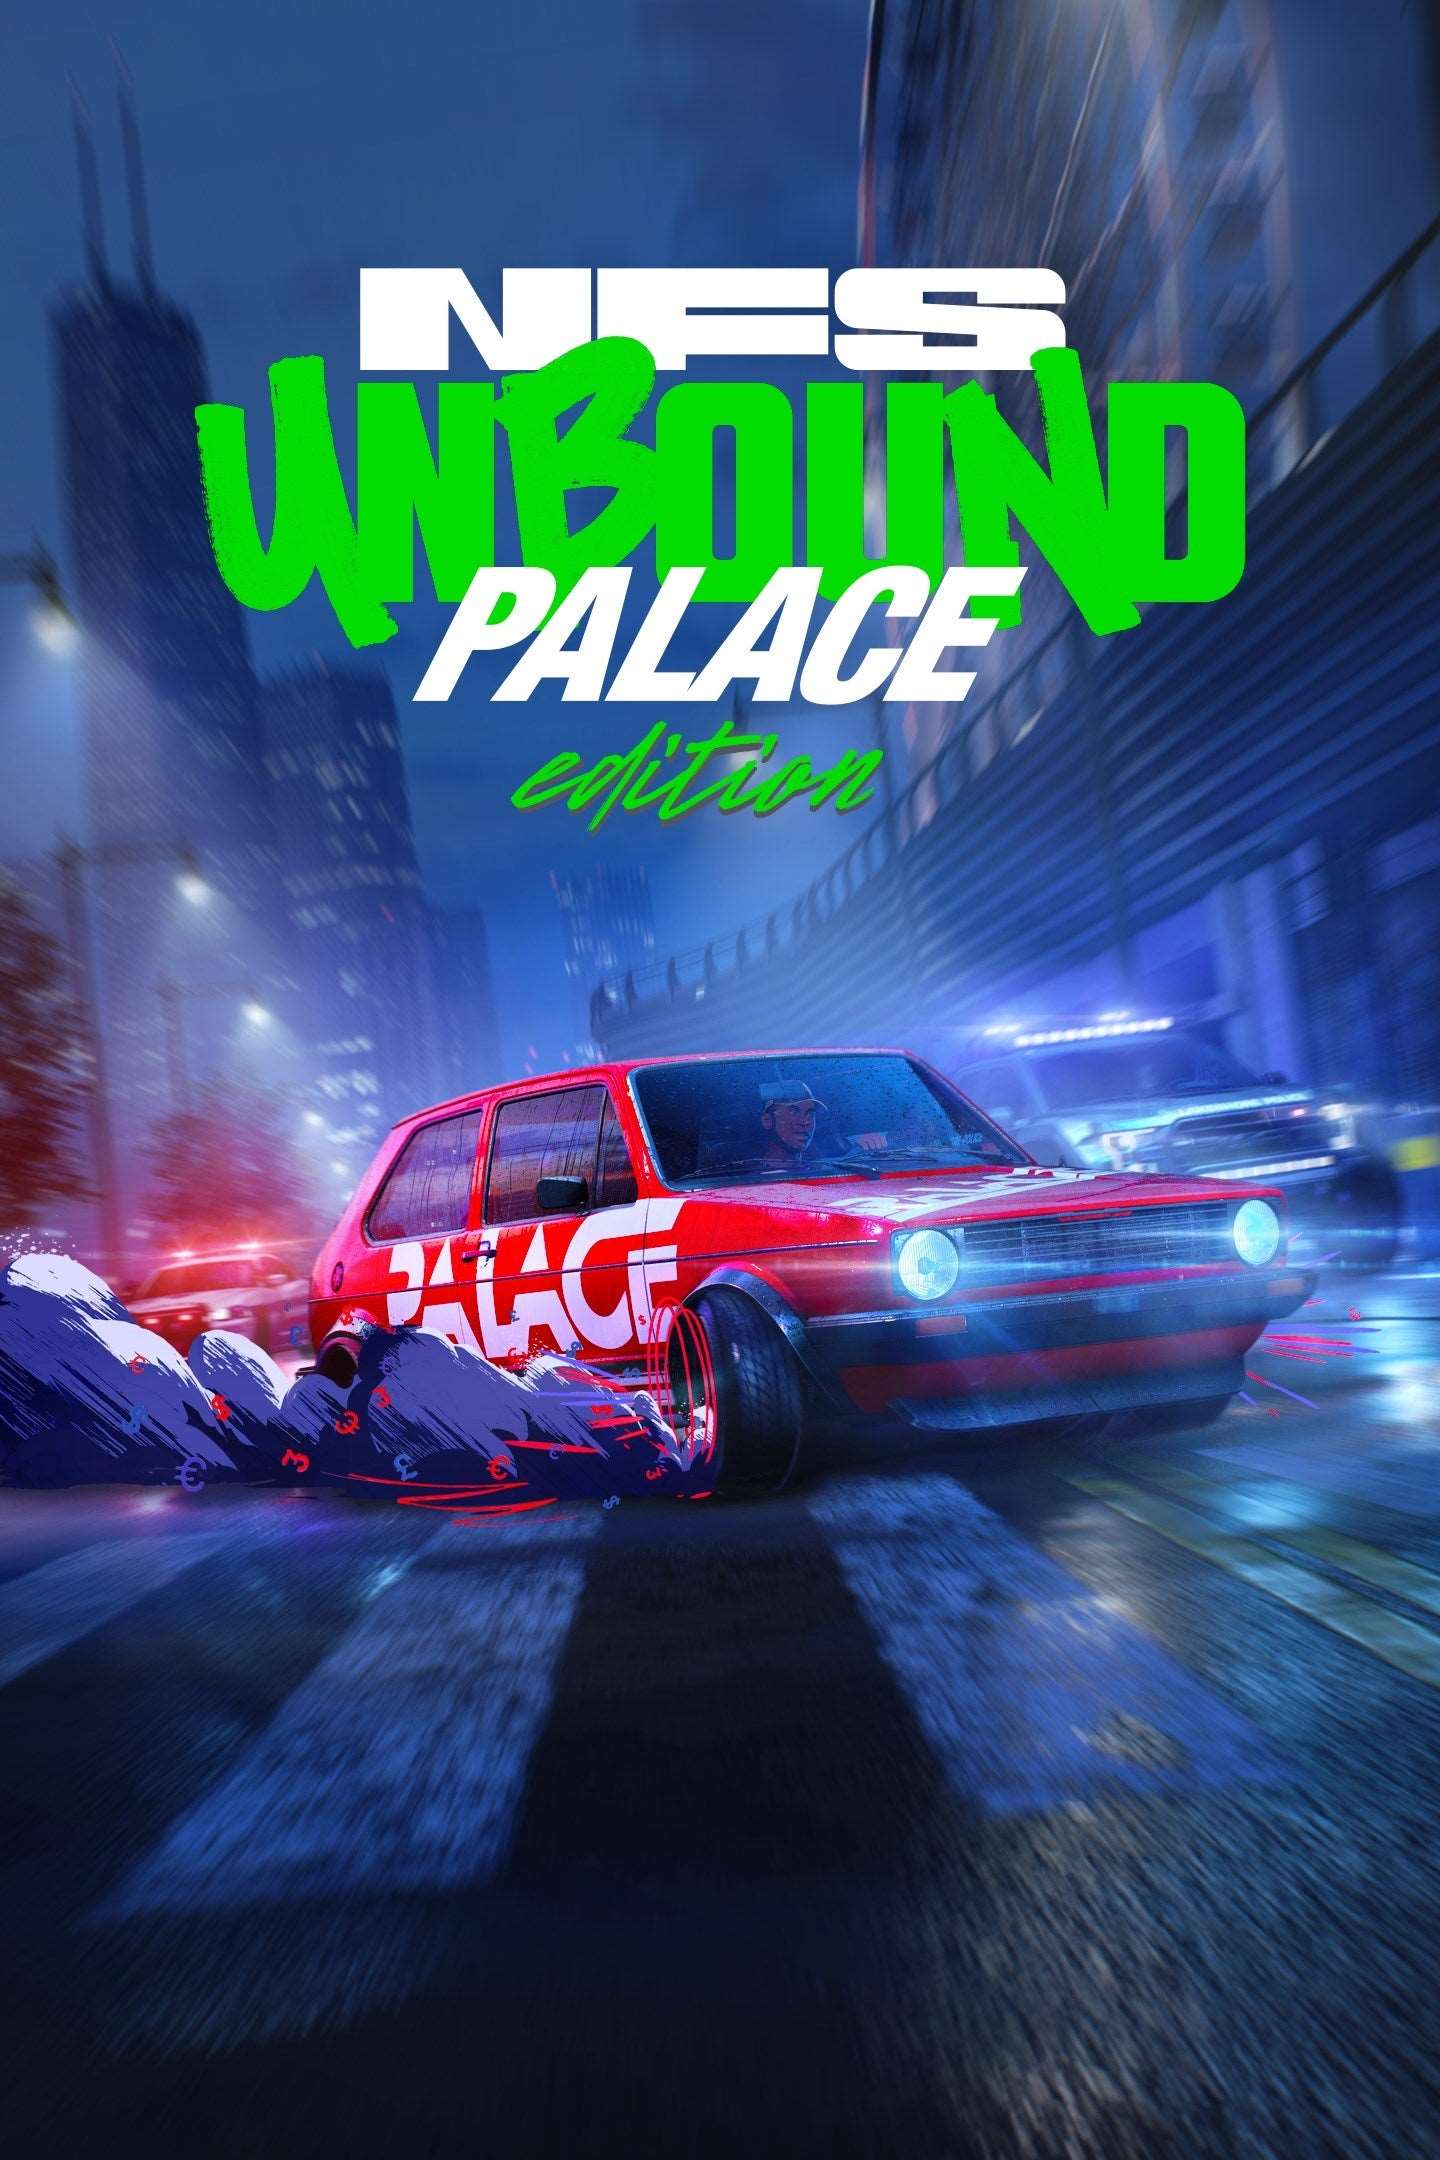 Need for Speed Unbound Palace Edition XboxKeys.cz